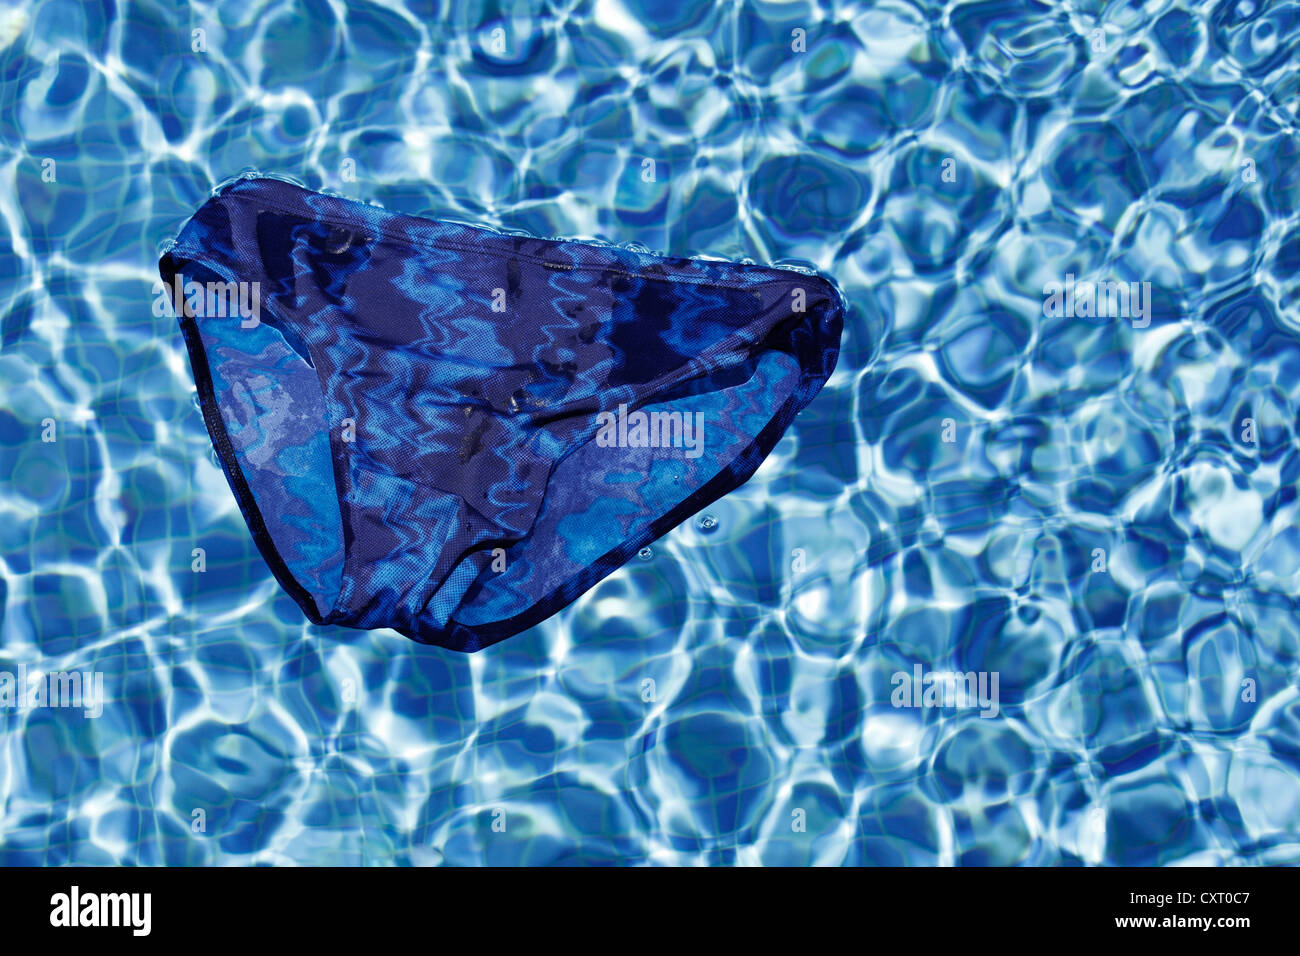 Blue swimming trunks floating on the surface of a swimming pool, symbolic image for vacations or holidays Stock Photo